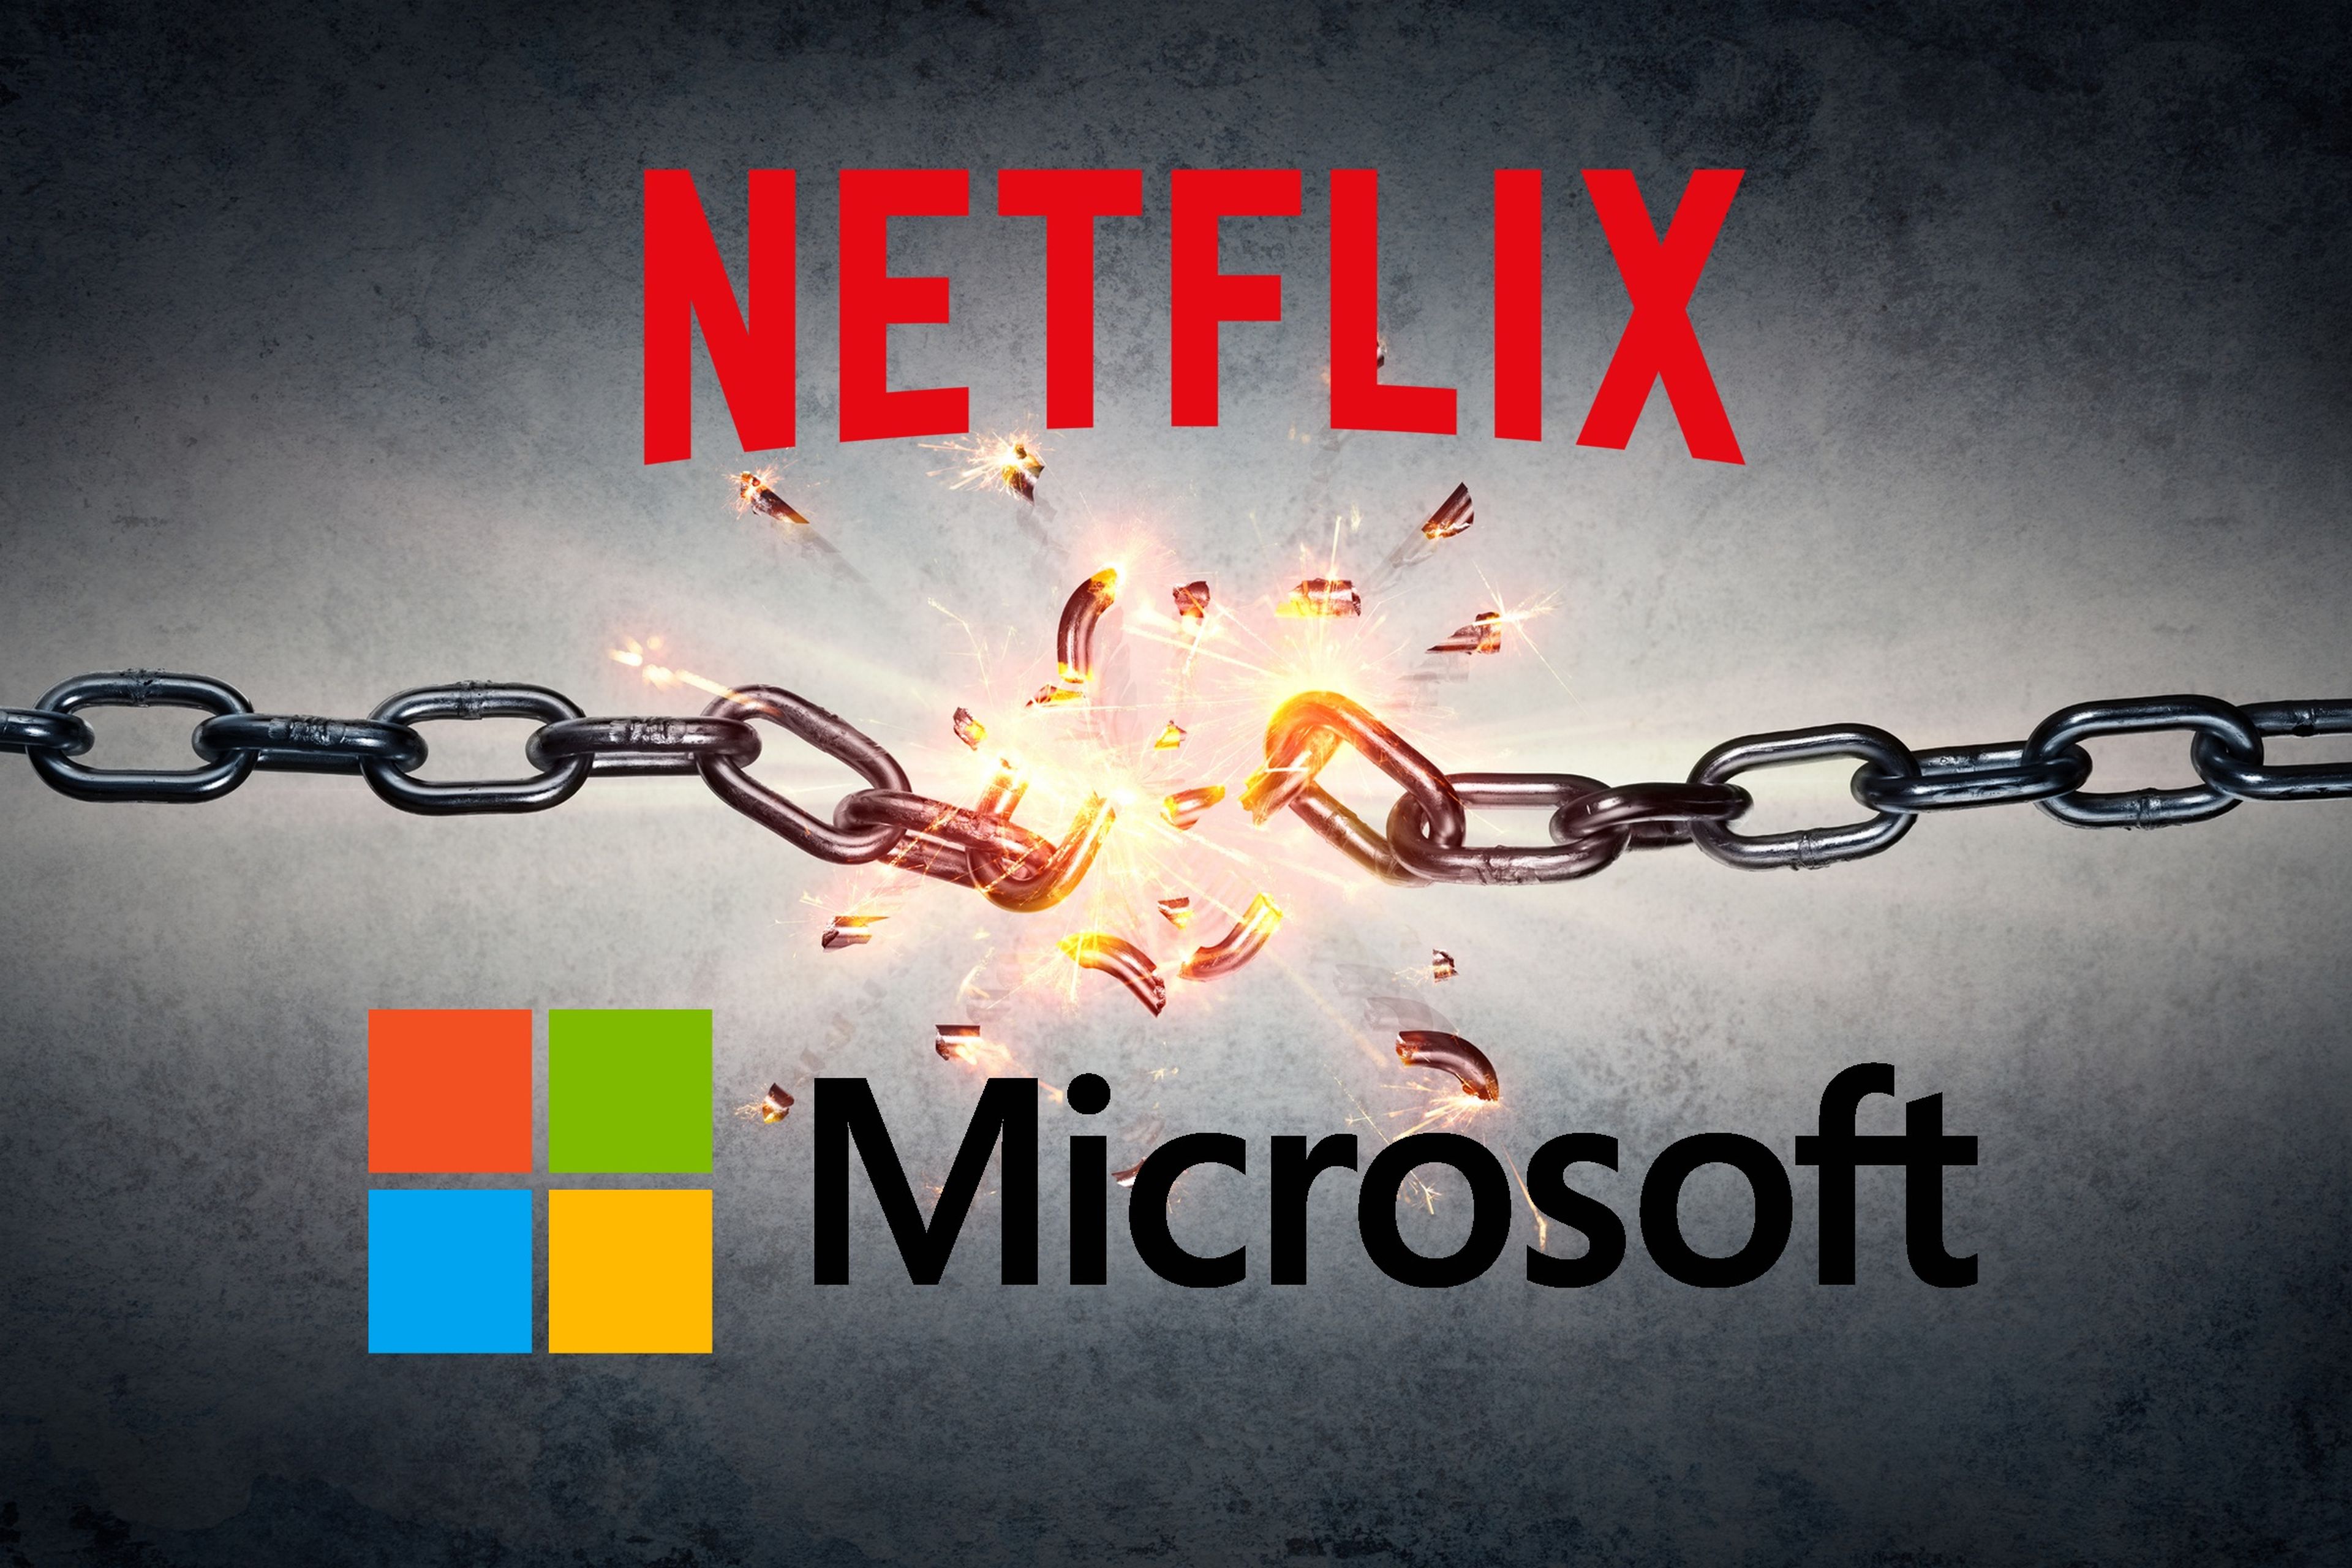 Netflix wants to break chains with Microsoft